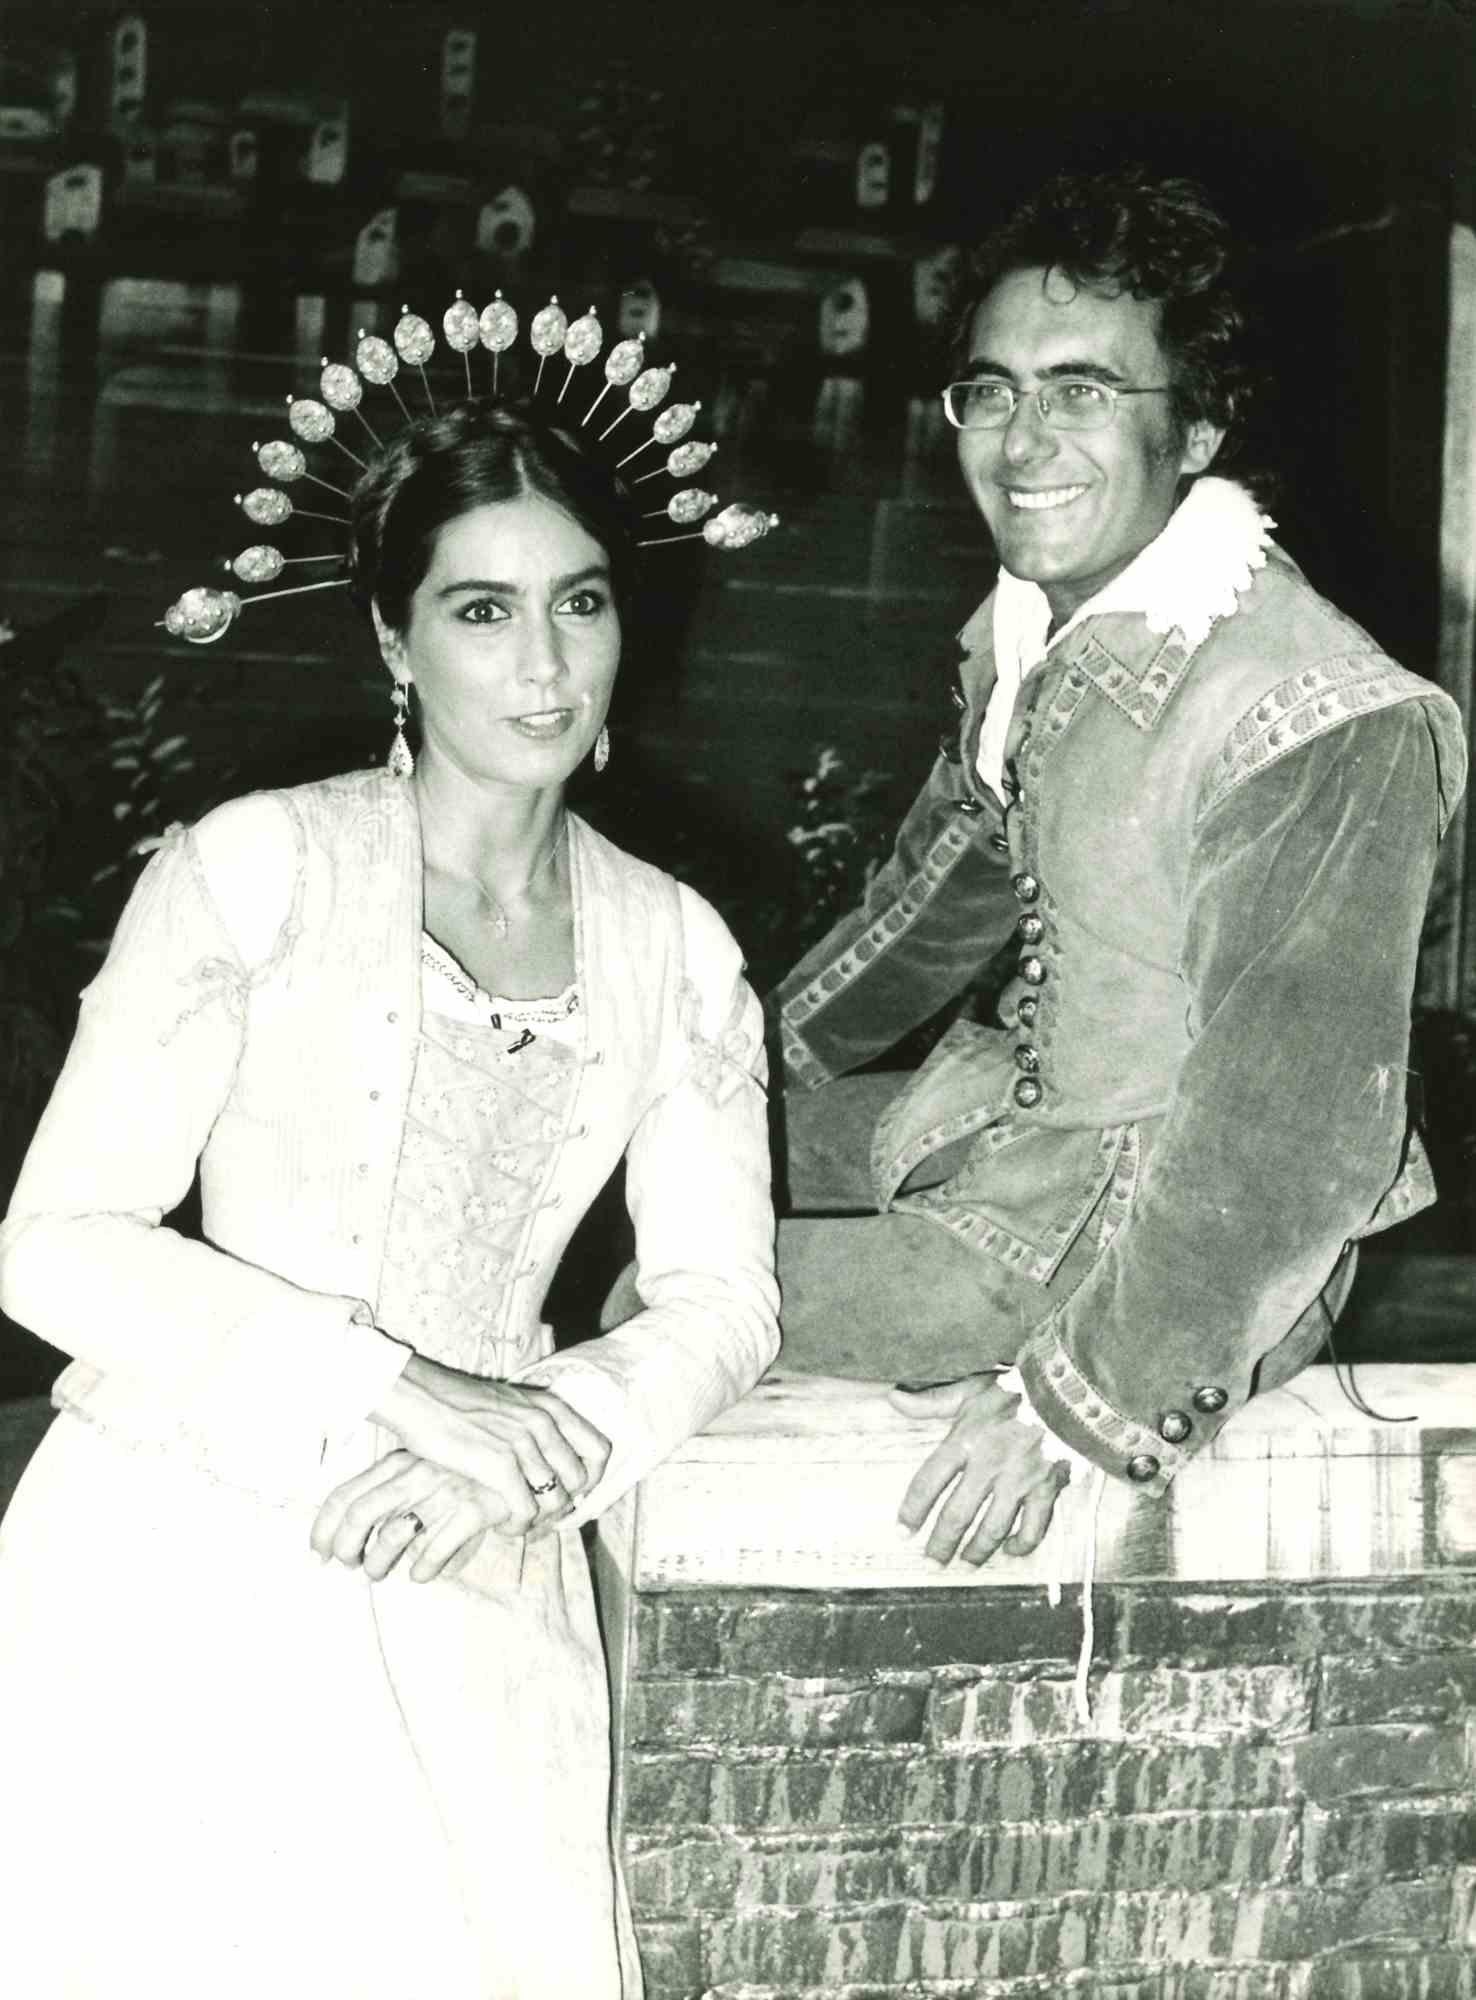 Unknown Portrait Photograph - Al Bano and Romina Power - Photograph - 1980s